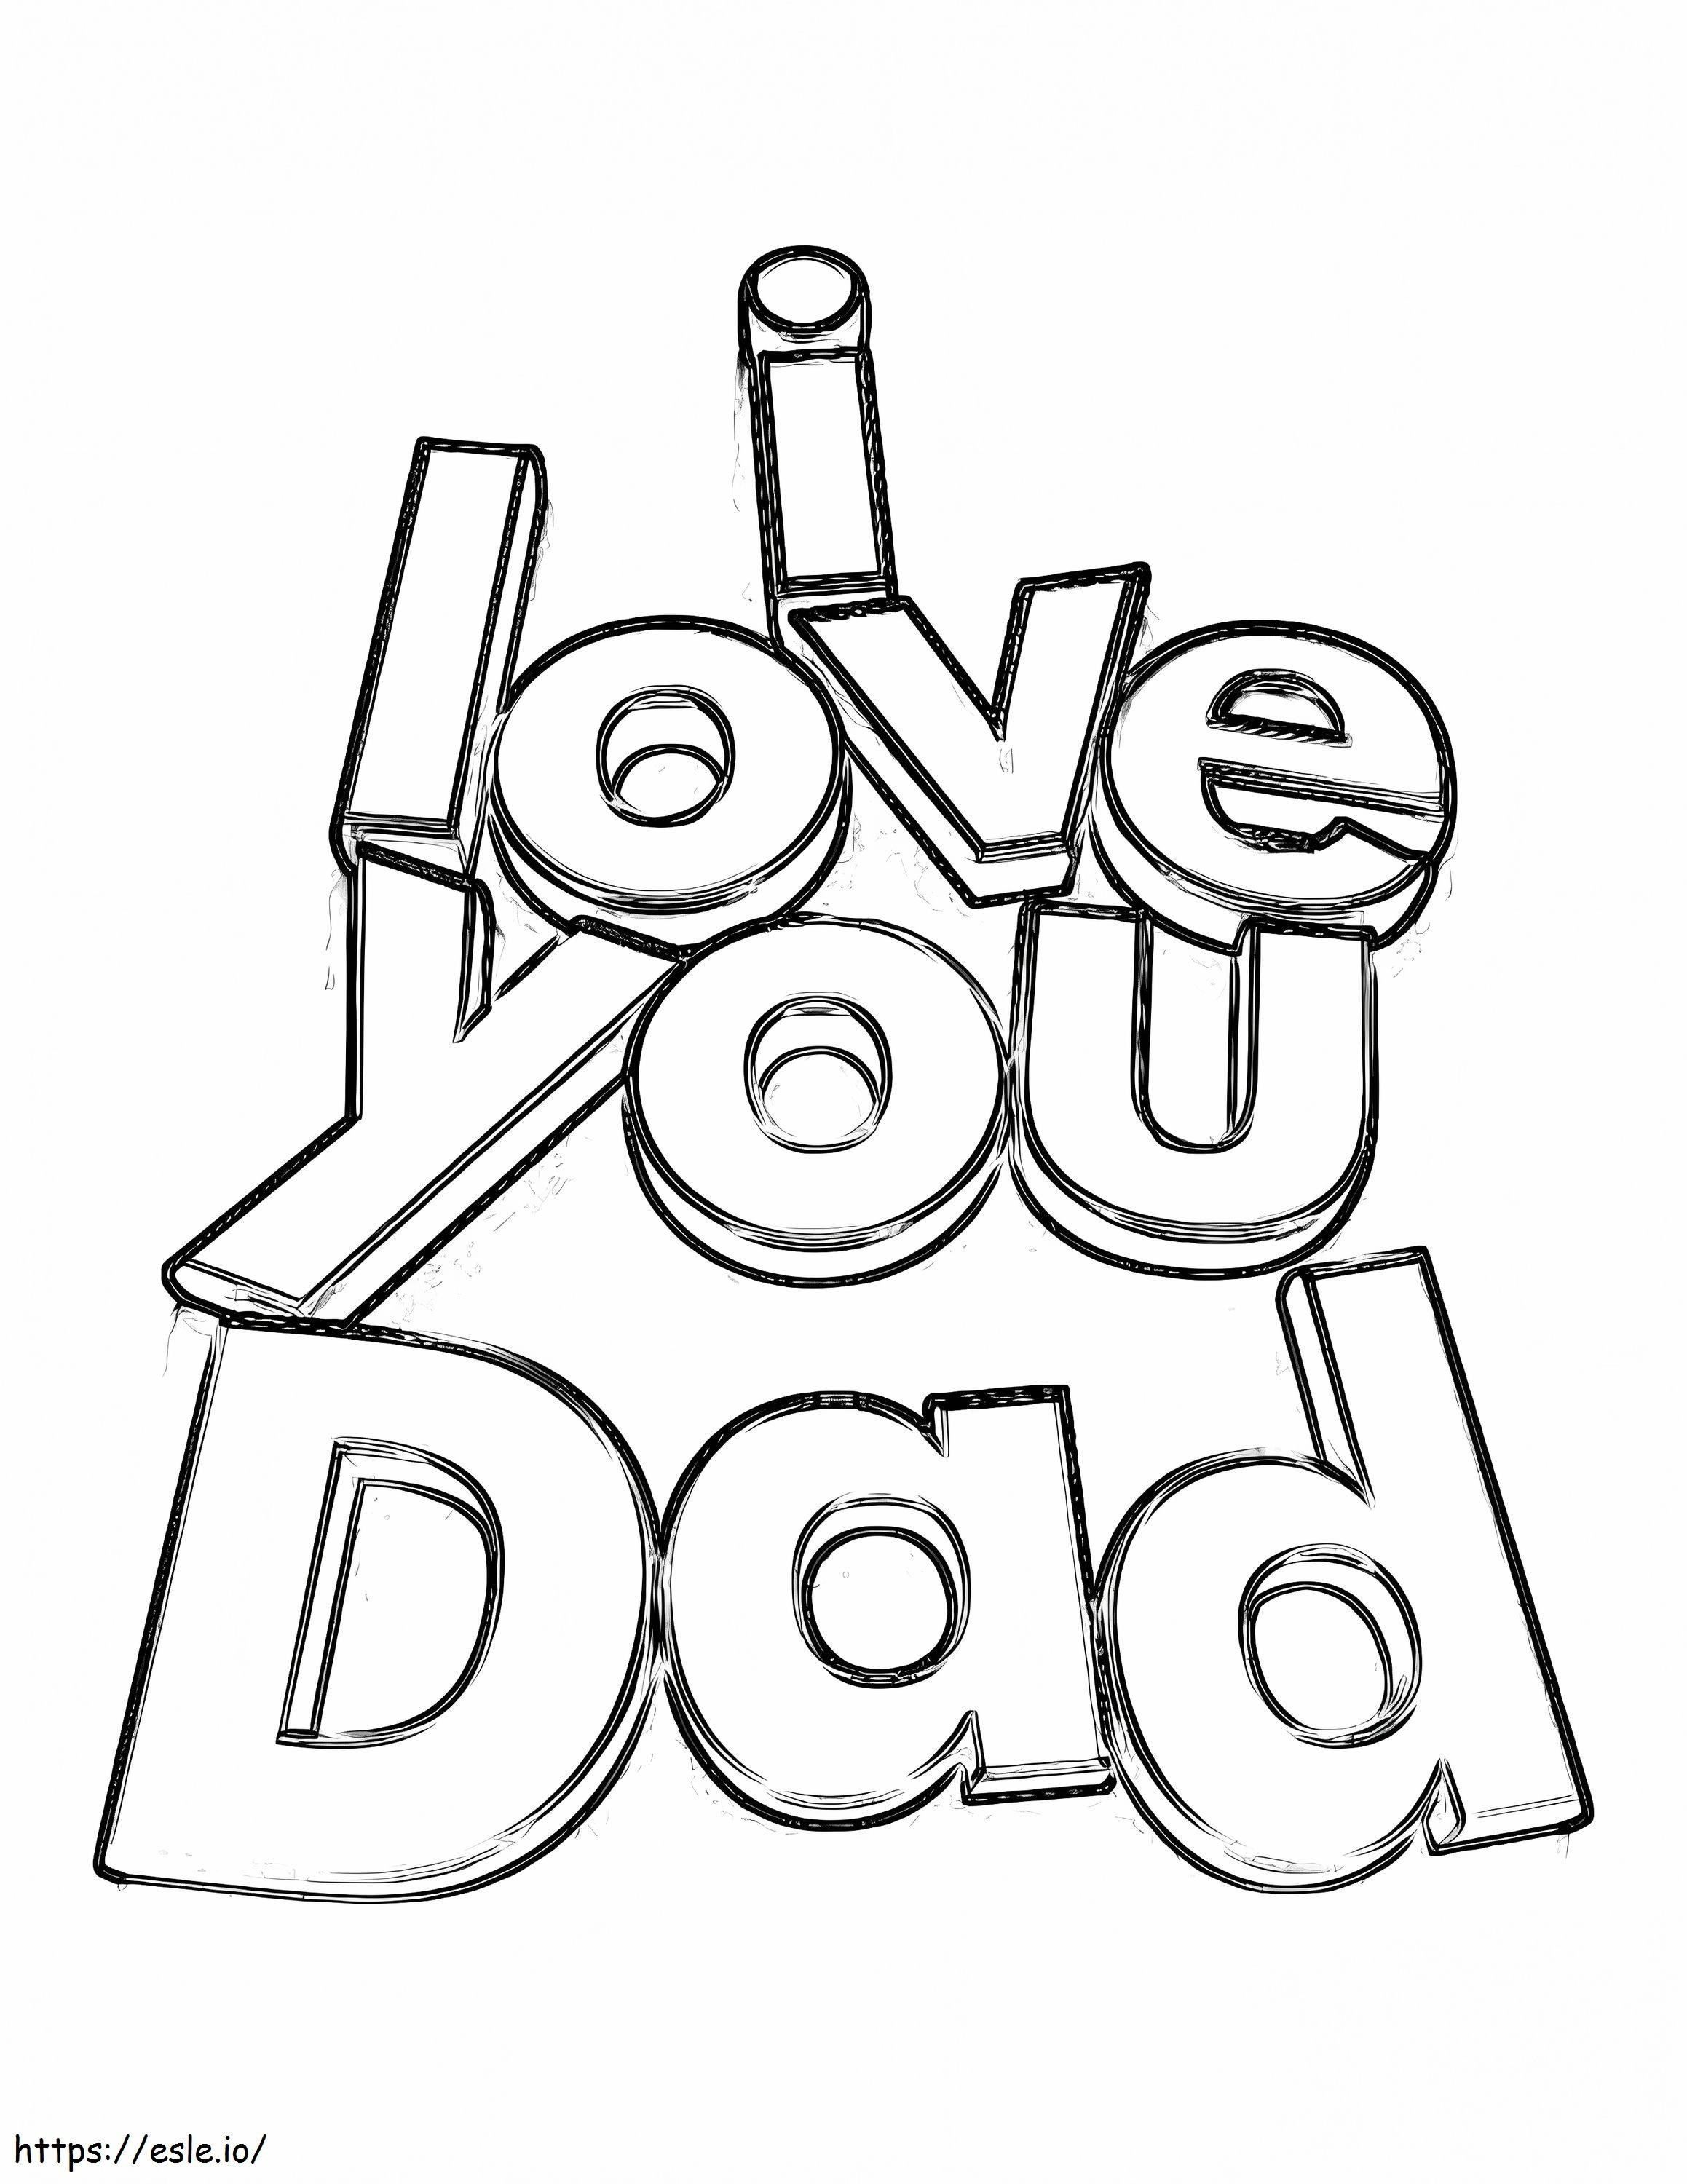 Love You Dad coloring page